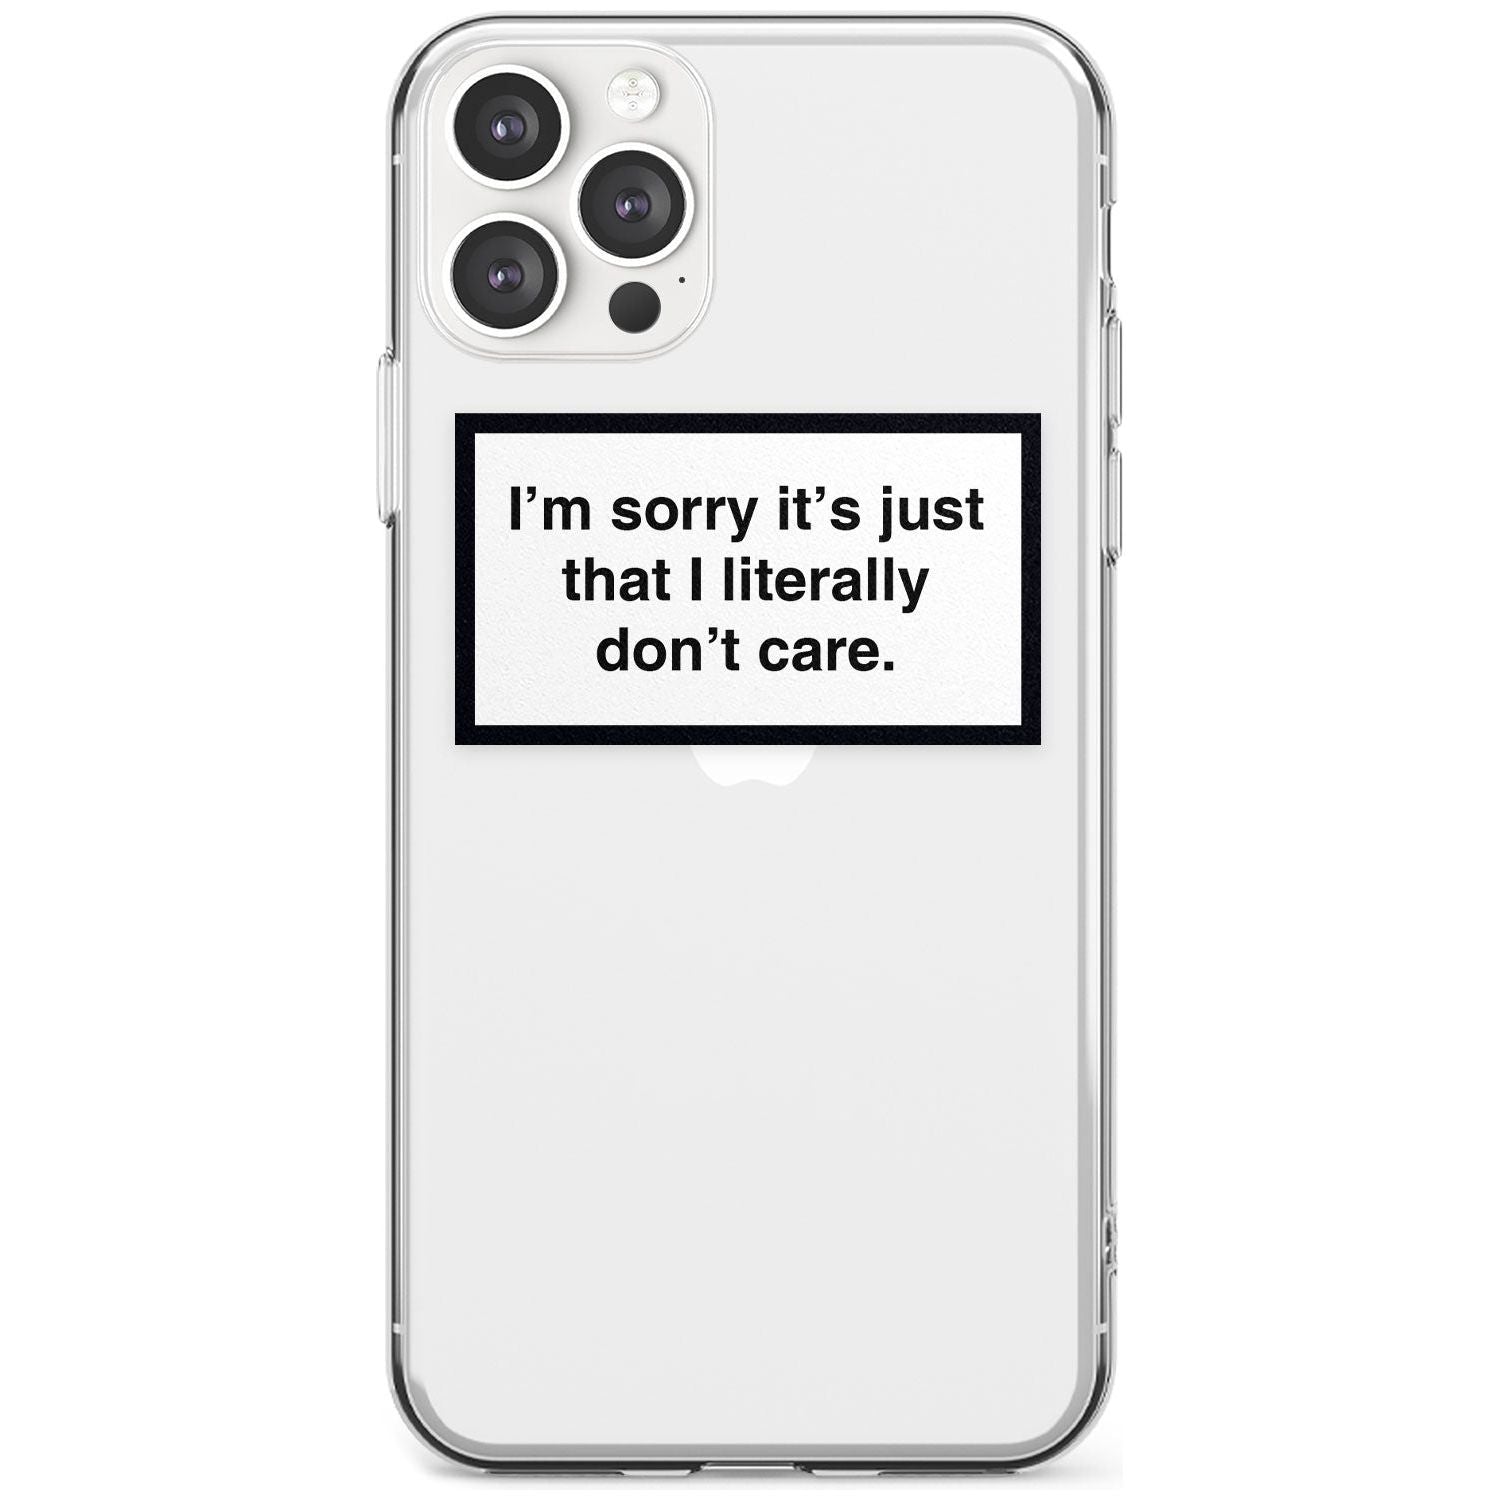 I'm sorry it's just that I literally don't care Black Impact Phone Case for iPhone 11 Pro Max